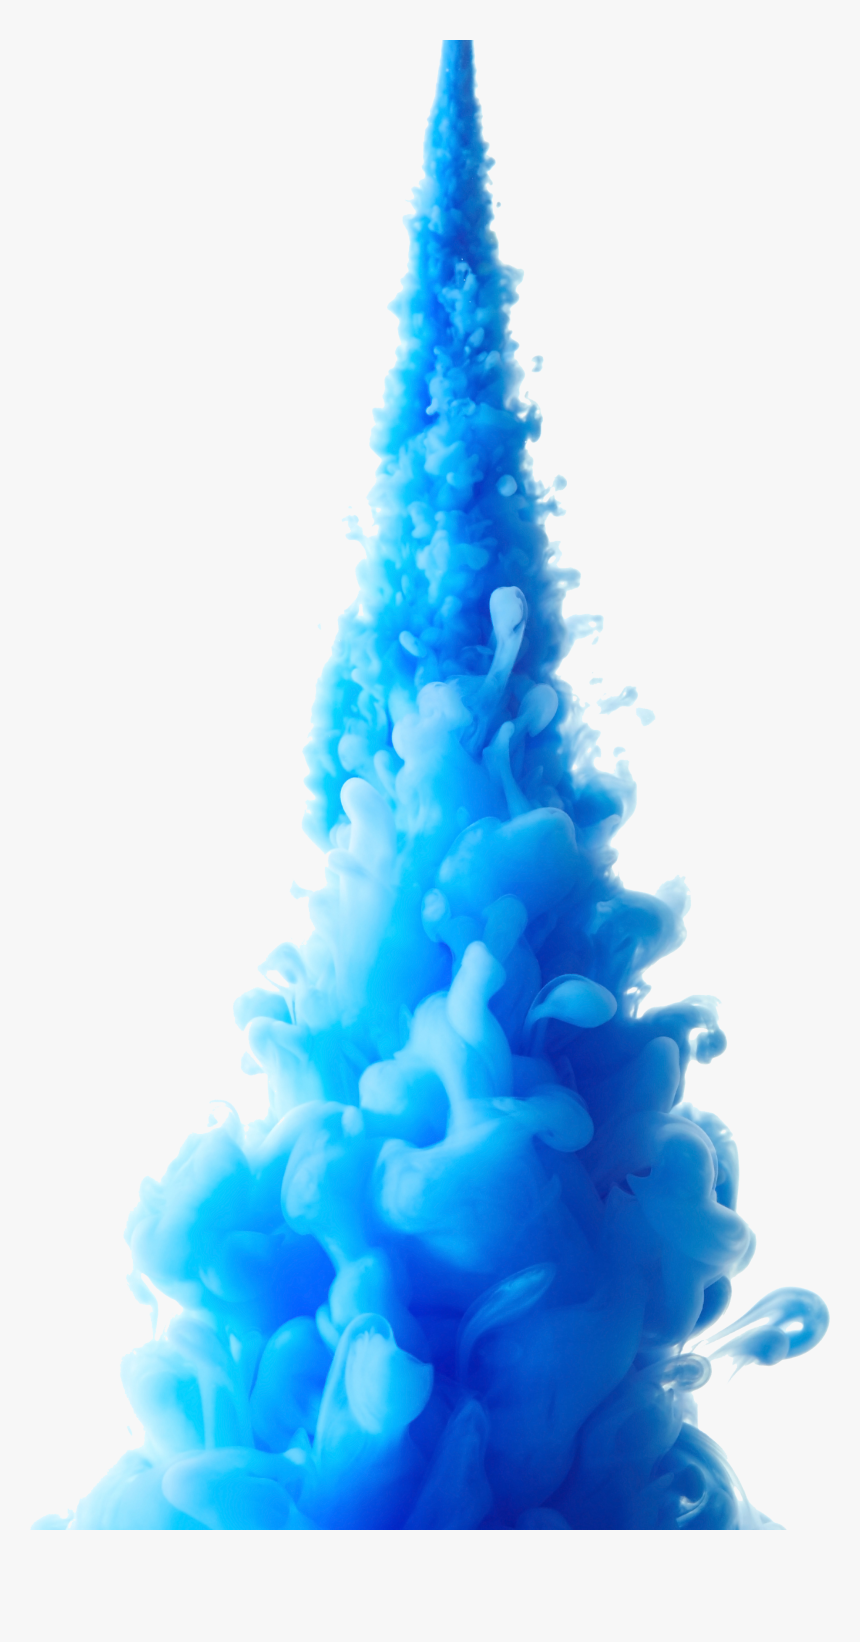 Blue Watercolor Water-color Painting Ink Png Image - Blue Smoke Transparent Background, Png Download, Free Download